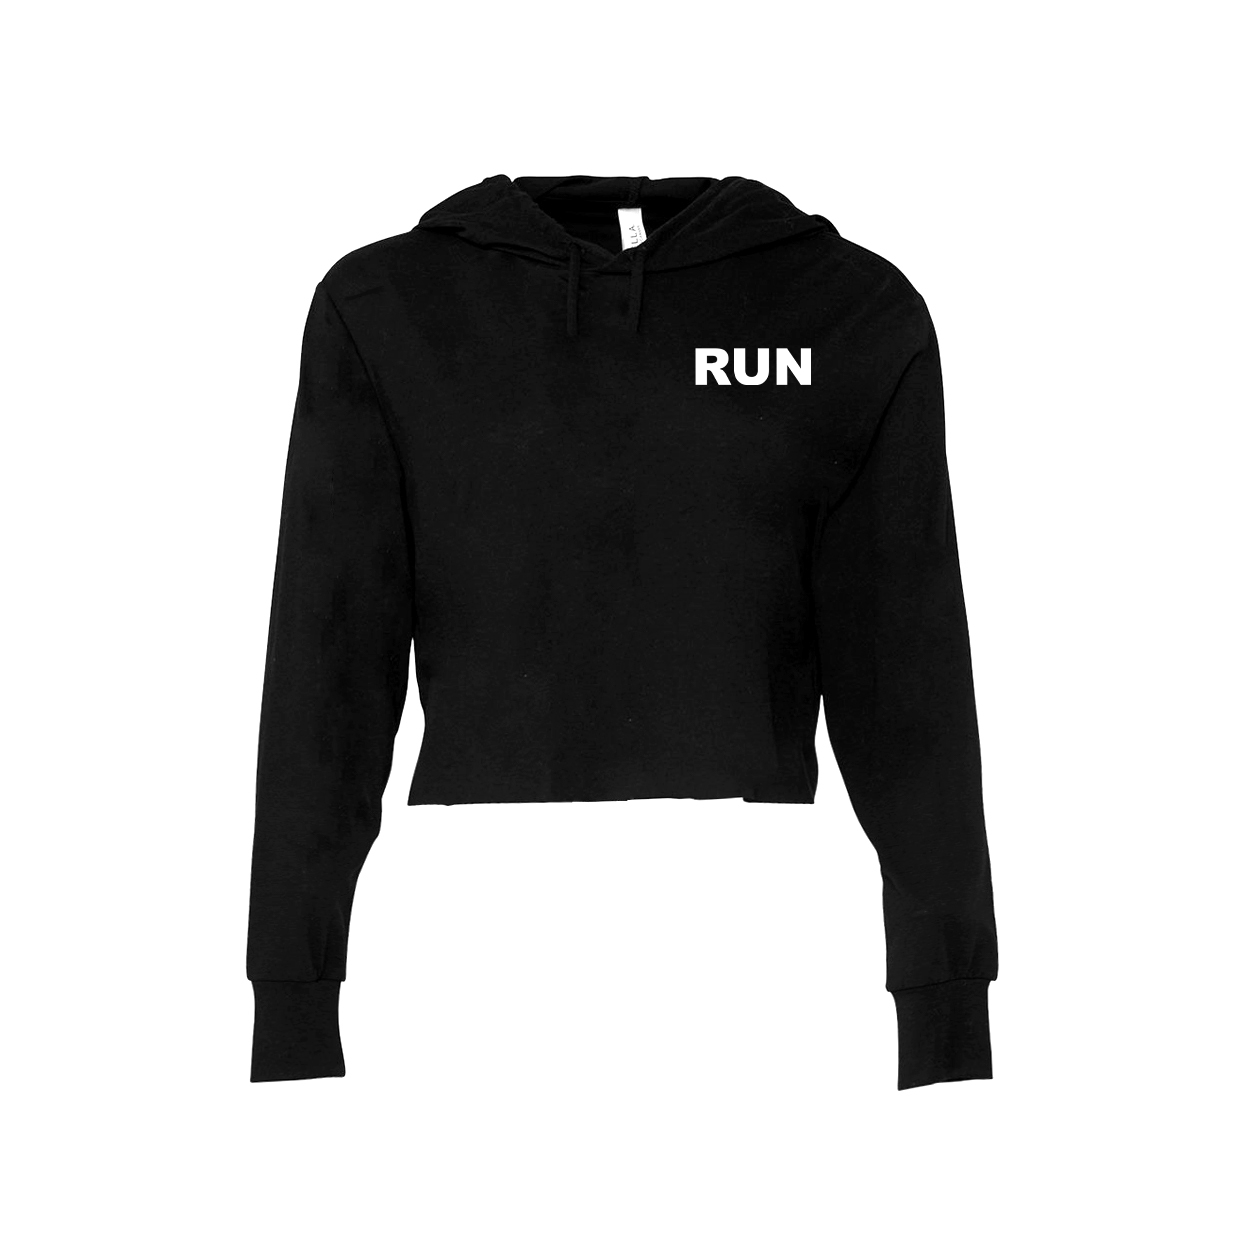 Run Brand Logo Night Out Womens Long Sleeve Cropped Hooded Tee Black